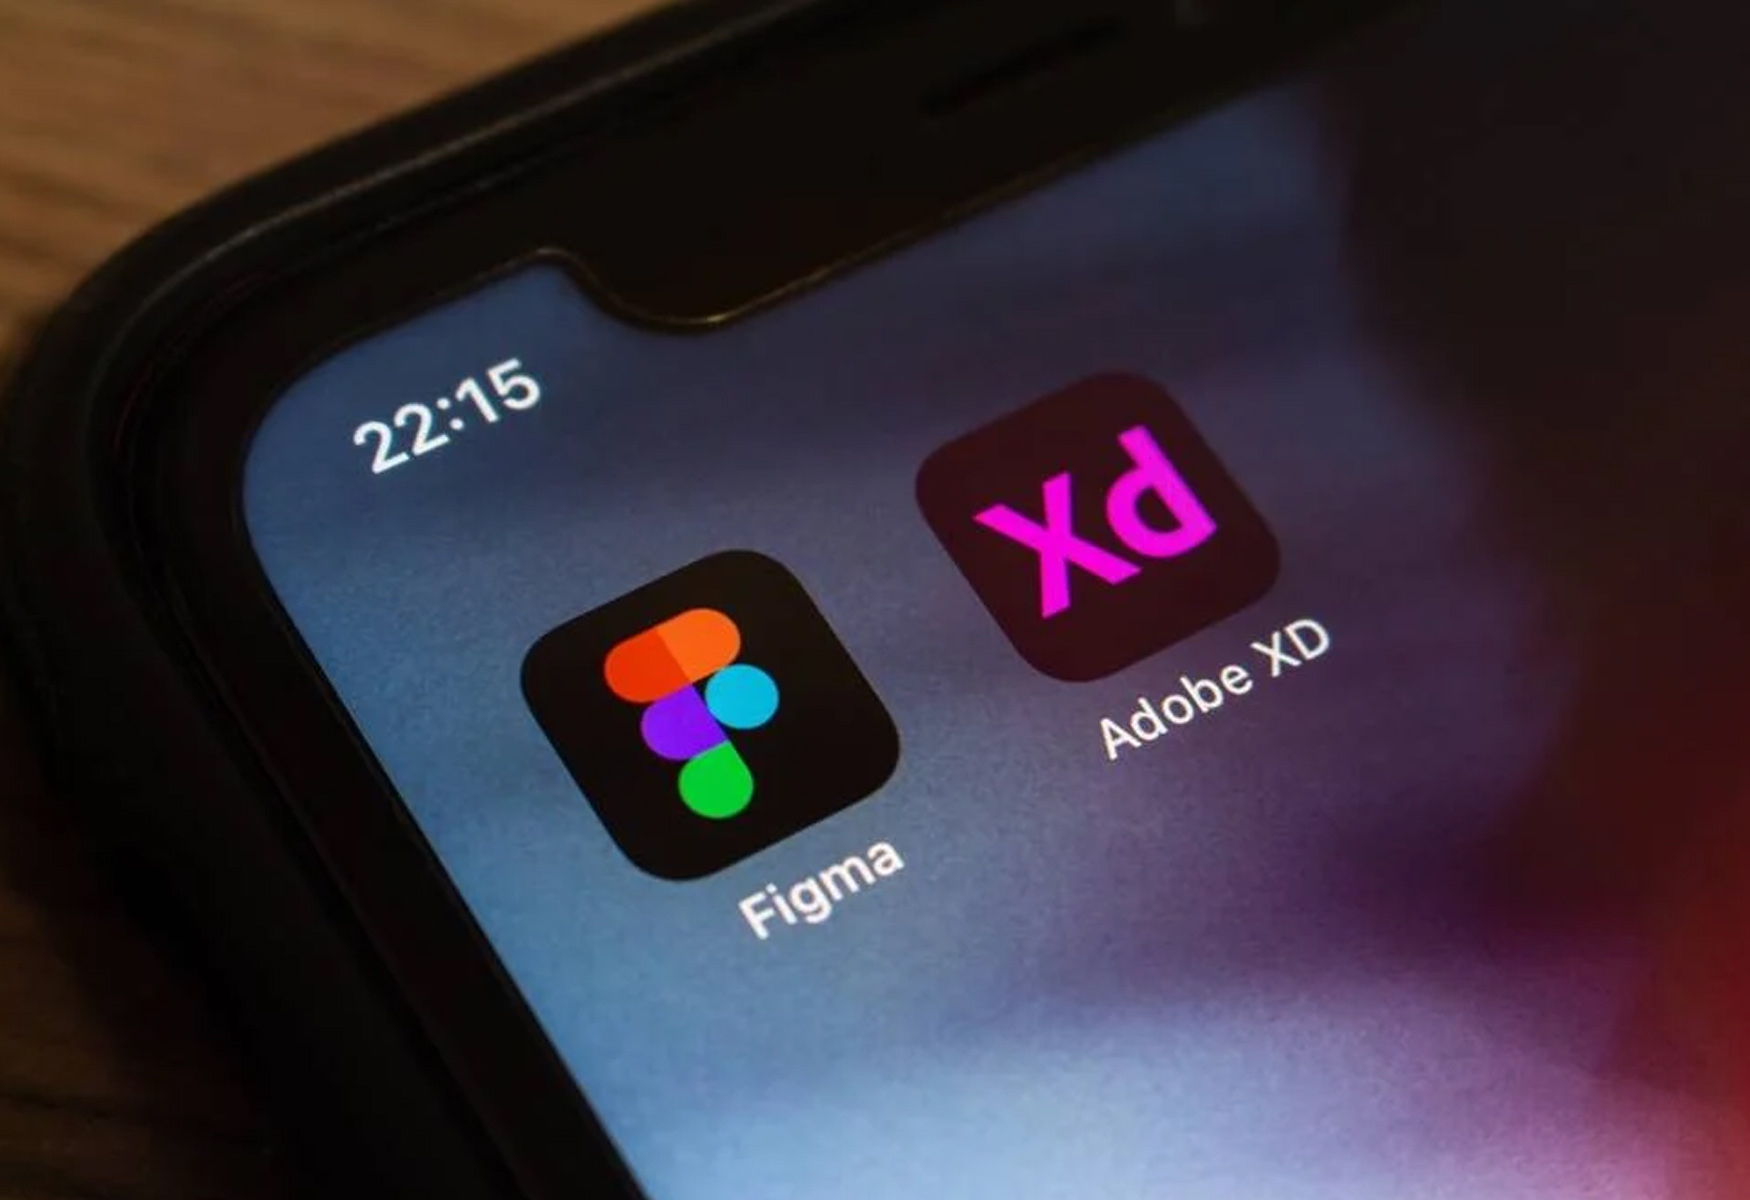 Adobe And Figma Terminate $20B Acquisition Plans Due To Regulatory Headwinds In Europe